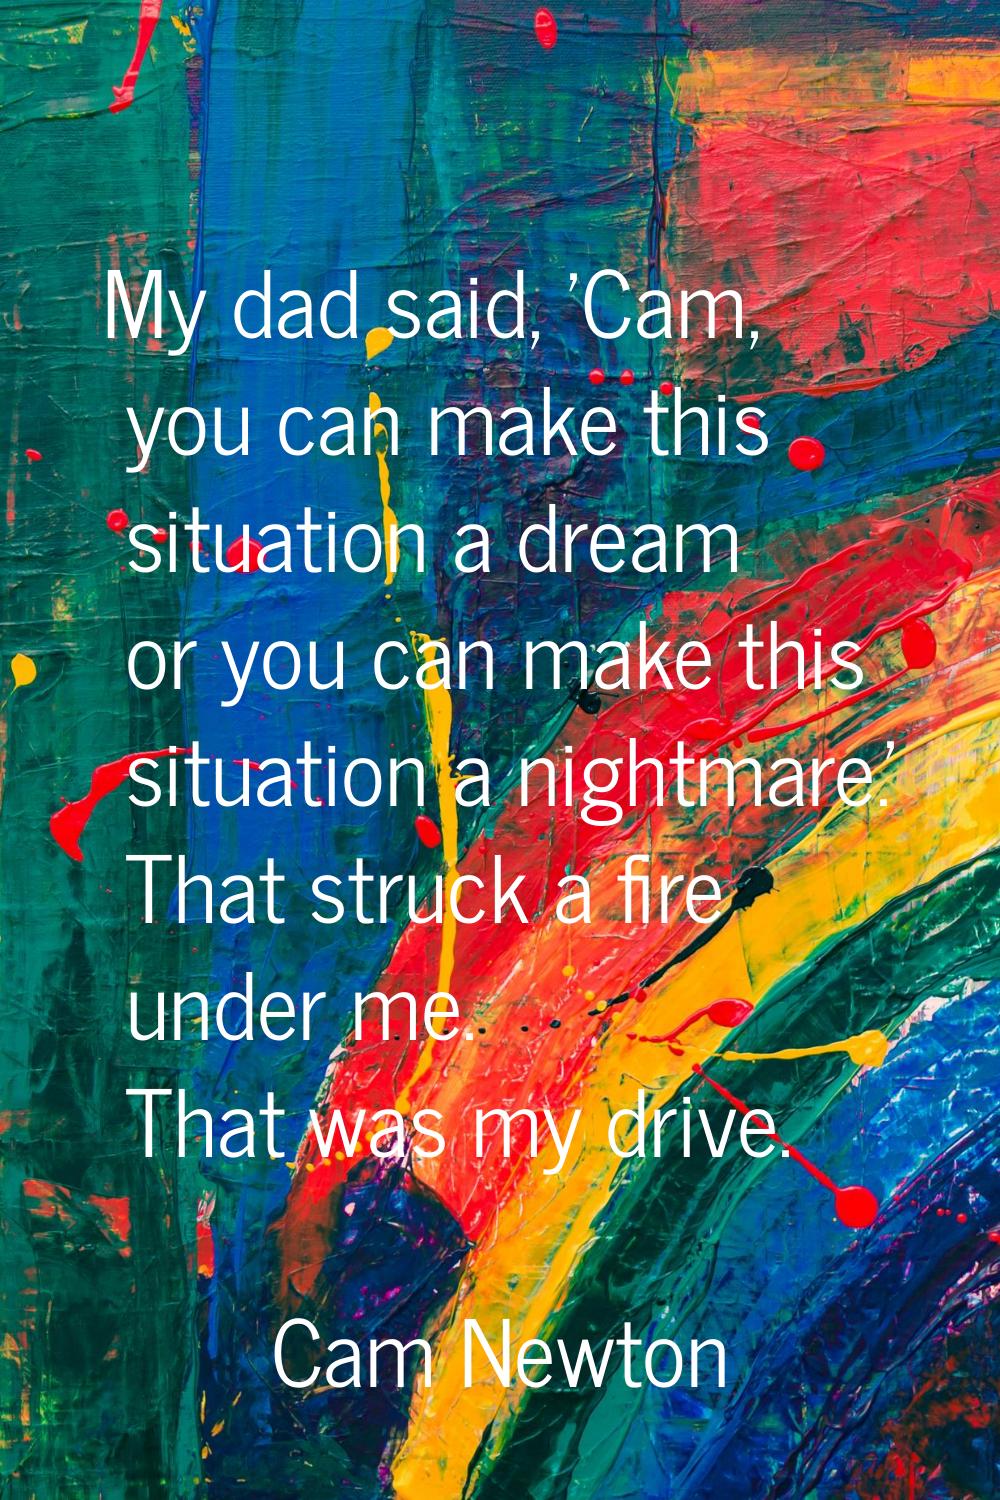 My dad said, 'Cam, you can make this situation a dream or you can make this situation a nightmare.'